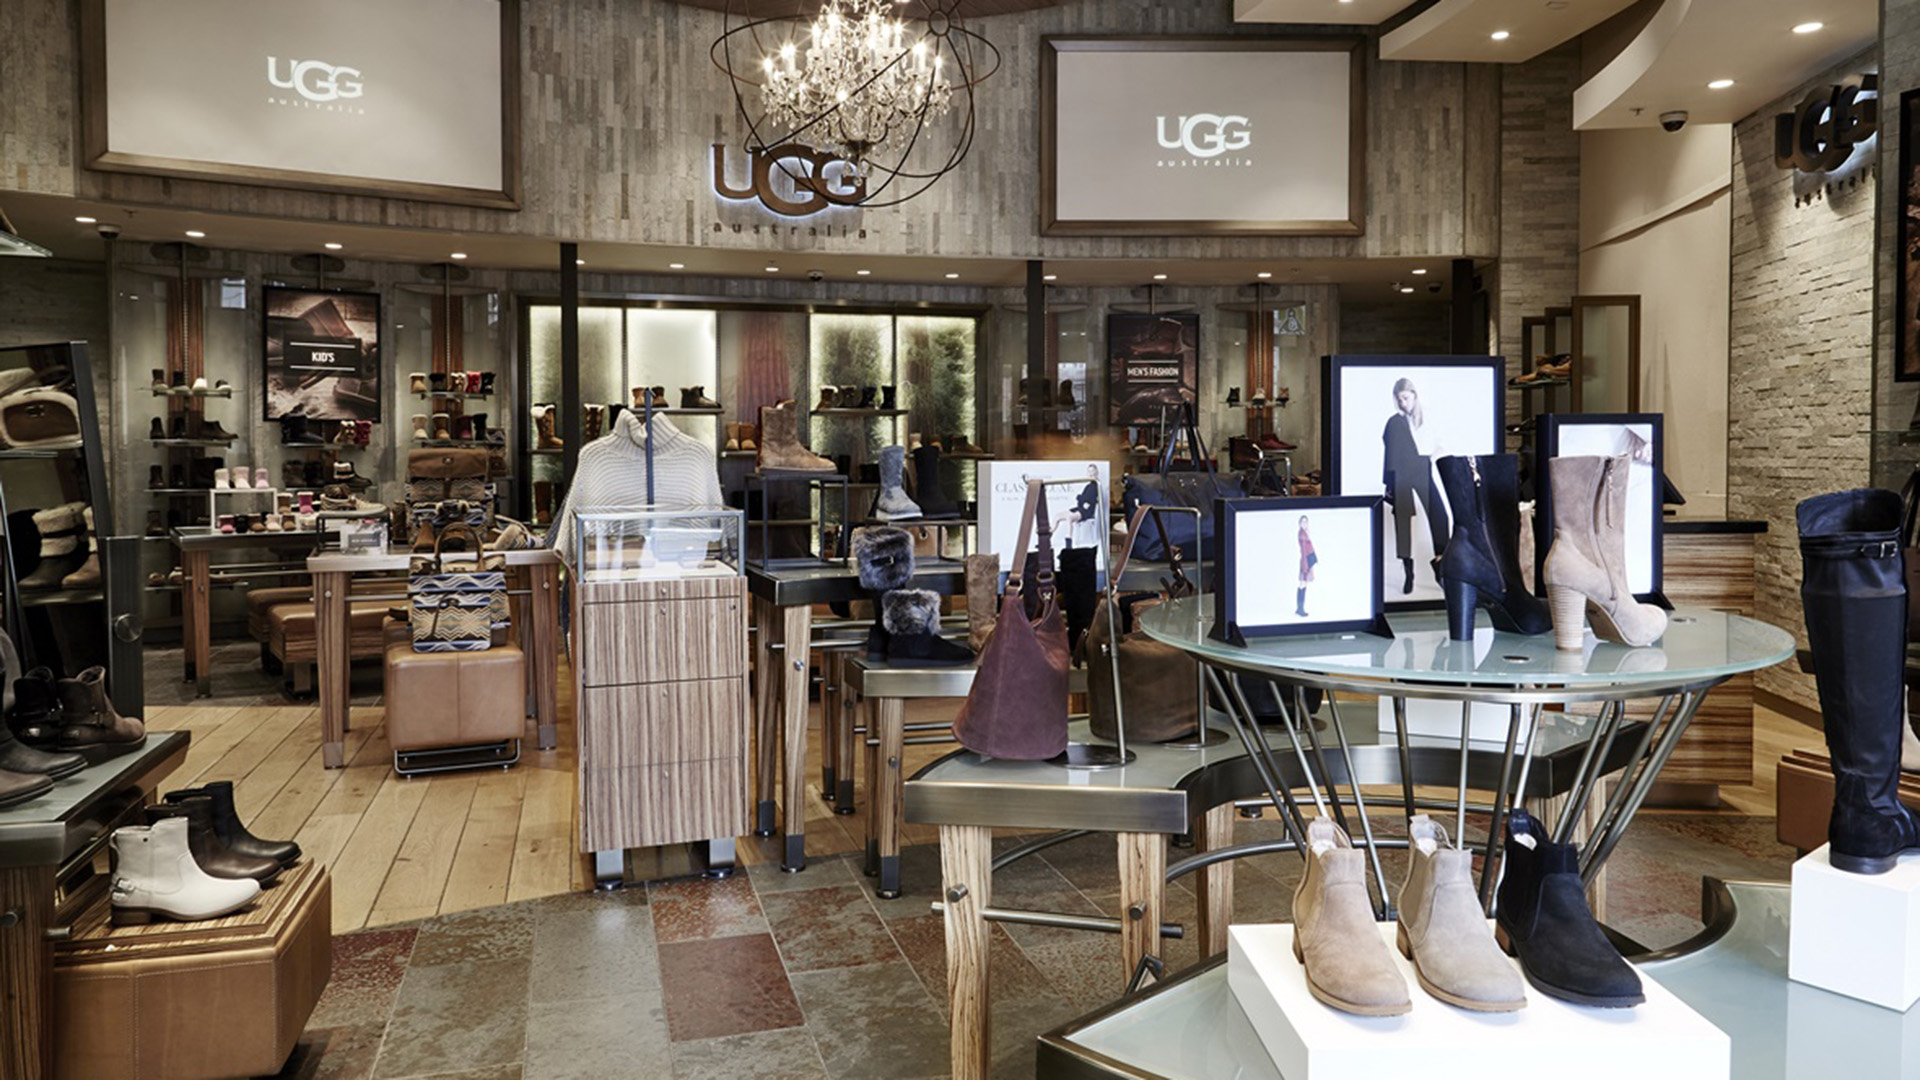 UGG Store 1920px Image